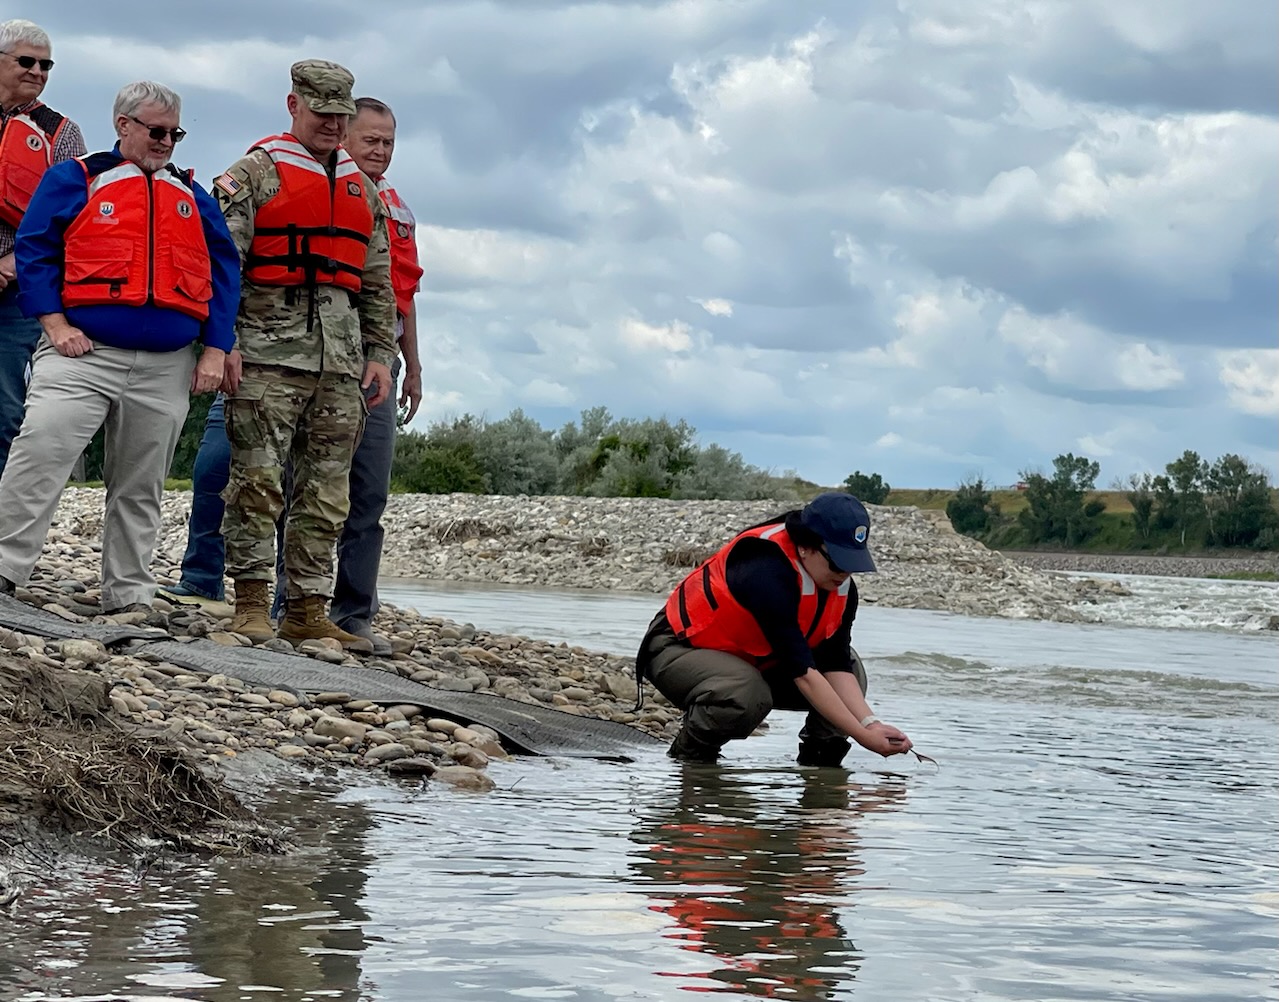 Bureau of Reclamation Commissioner Camille Calimlim Touton releases a pallid sturgeon into the Lower Yellowstone River during a ribbon cutting event for the Lower Yellowstone Fish Bypass Channel in Montana, July 26, 2022.